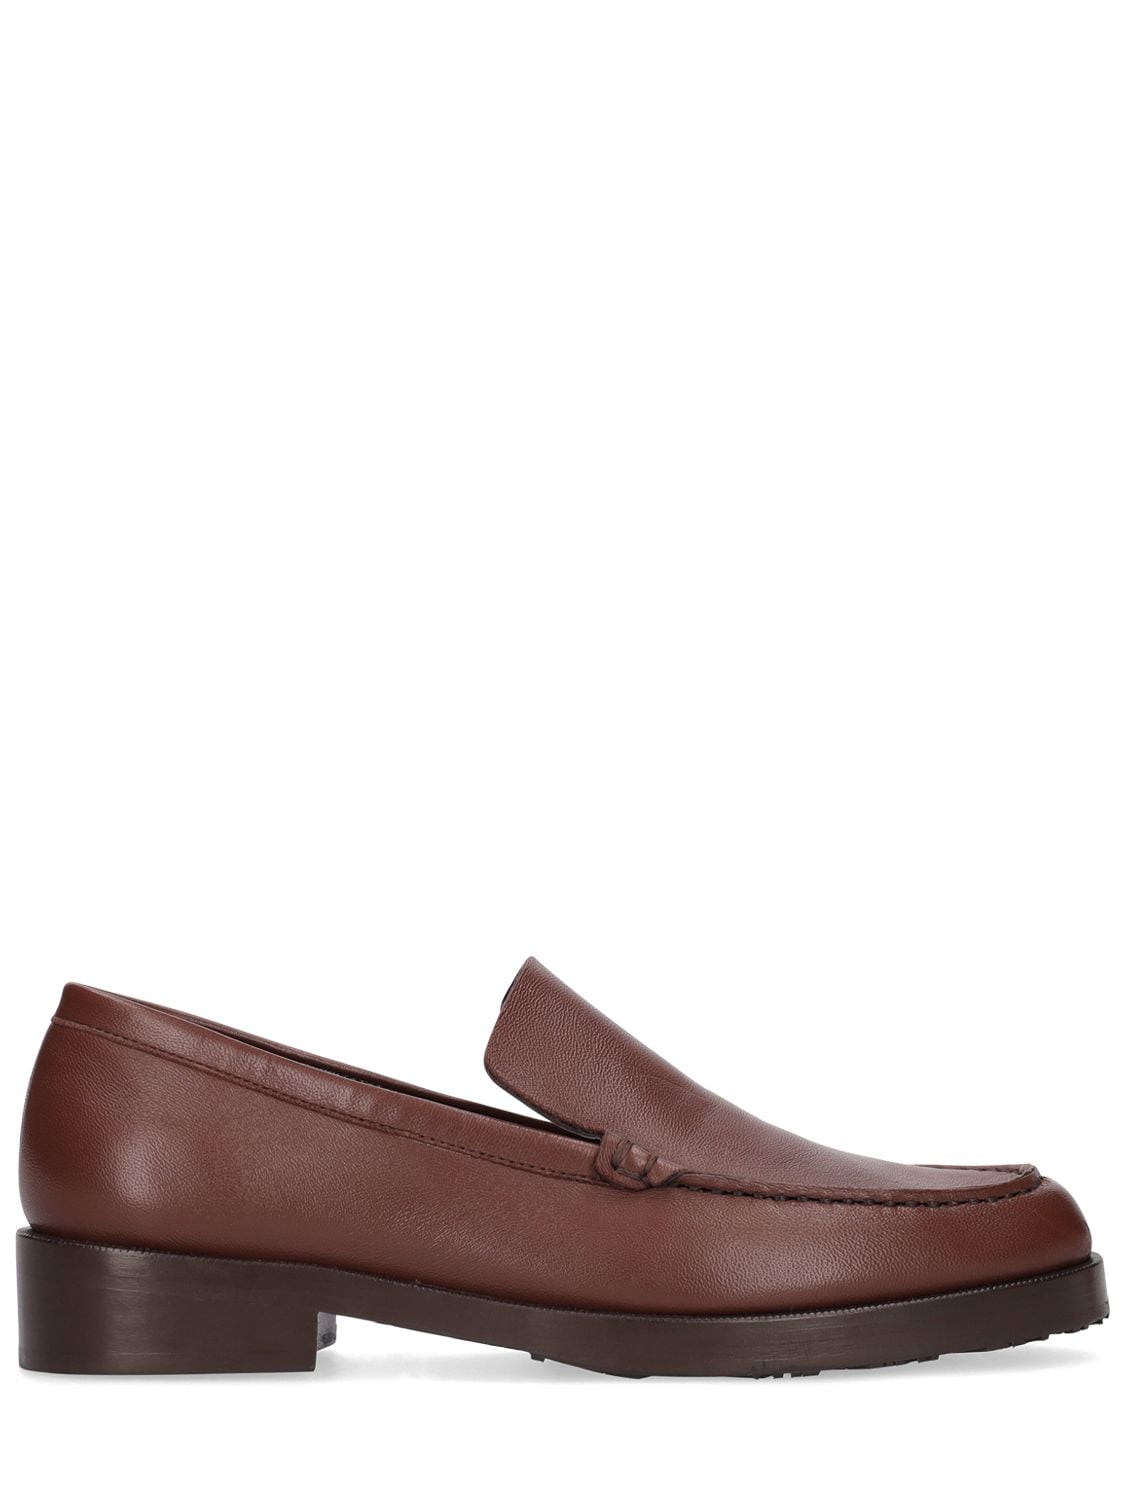 20mm Rafael Leather Loafers